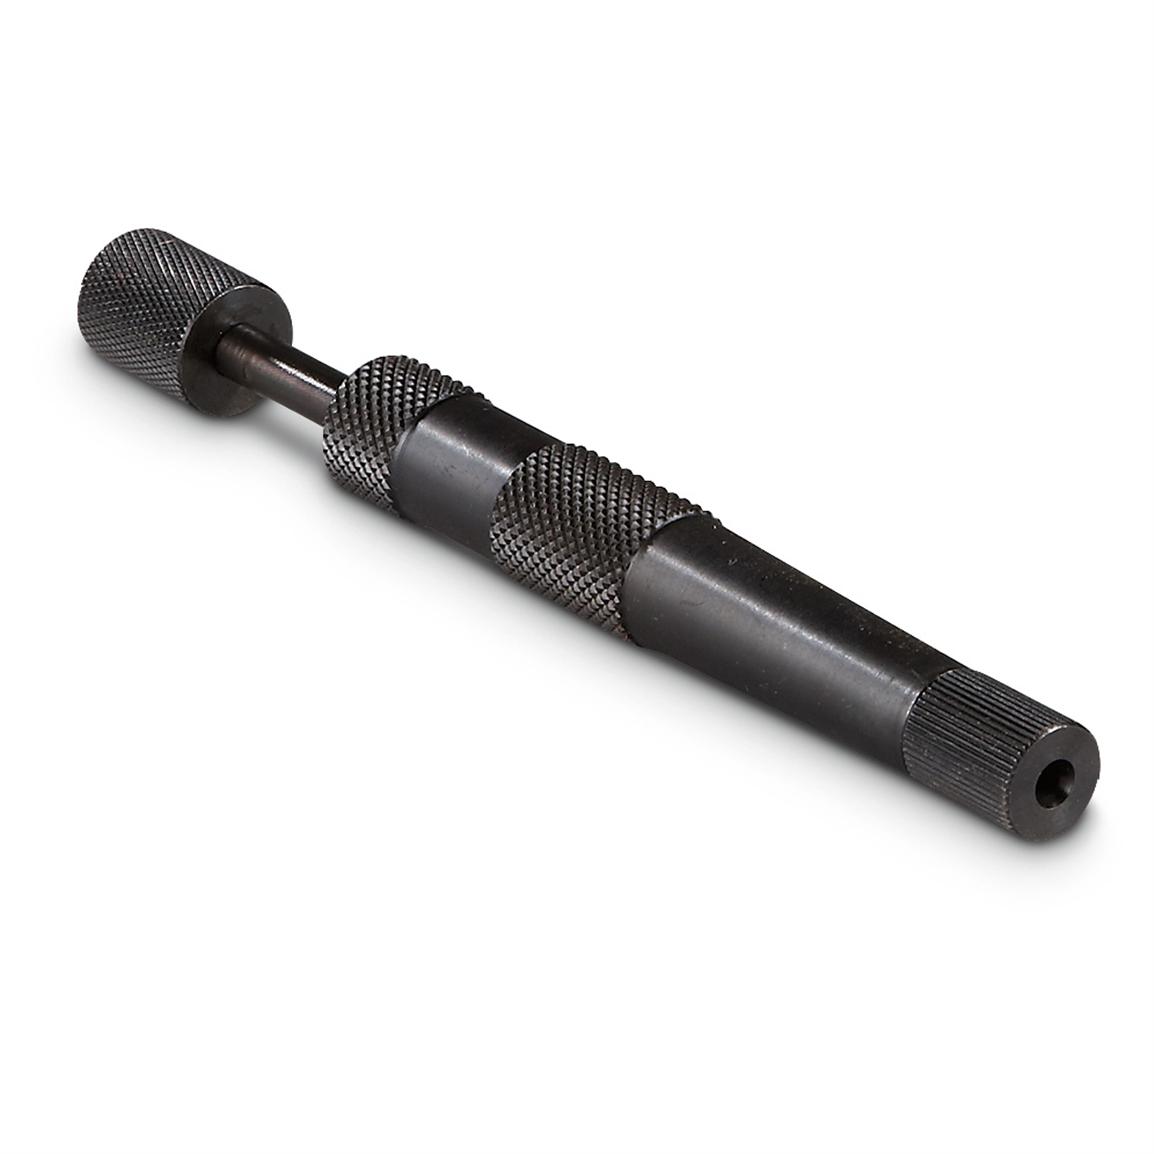 Grease Fitting Cleaning Tool - 230103, Vehicle Maintenance at Sportsman